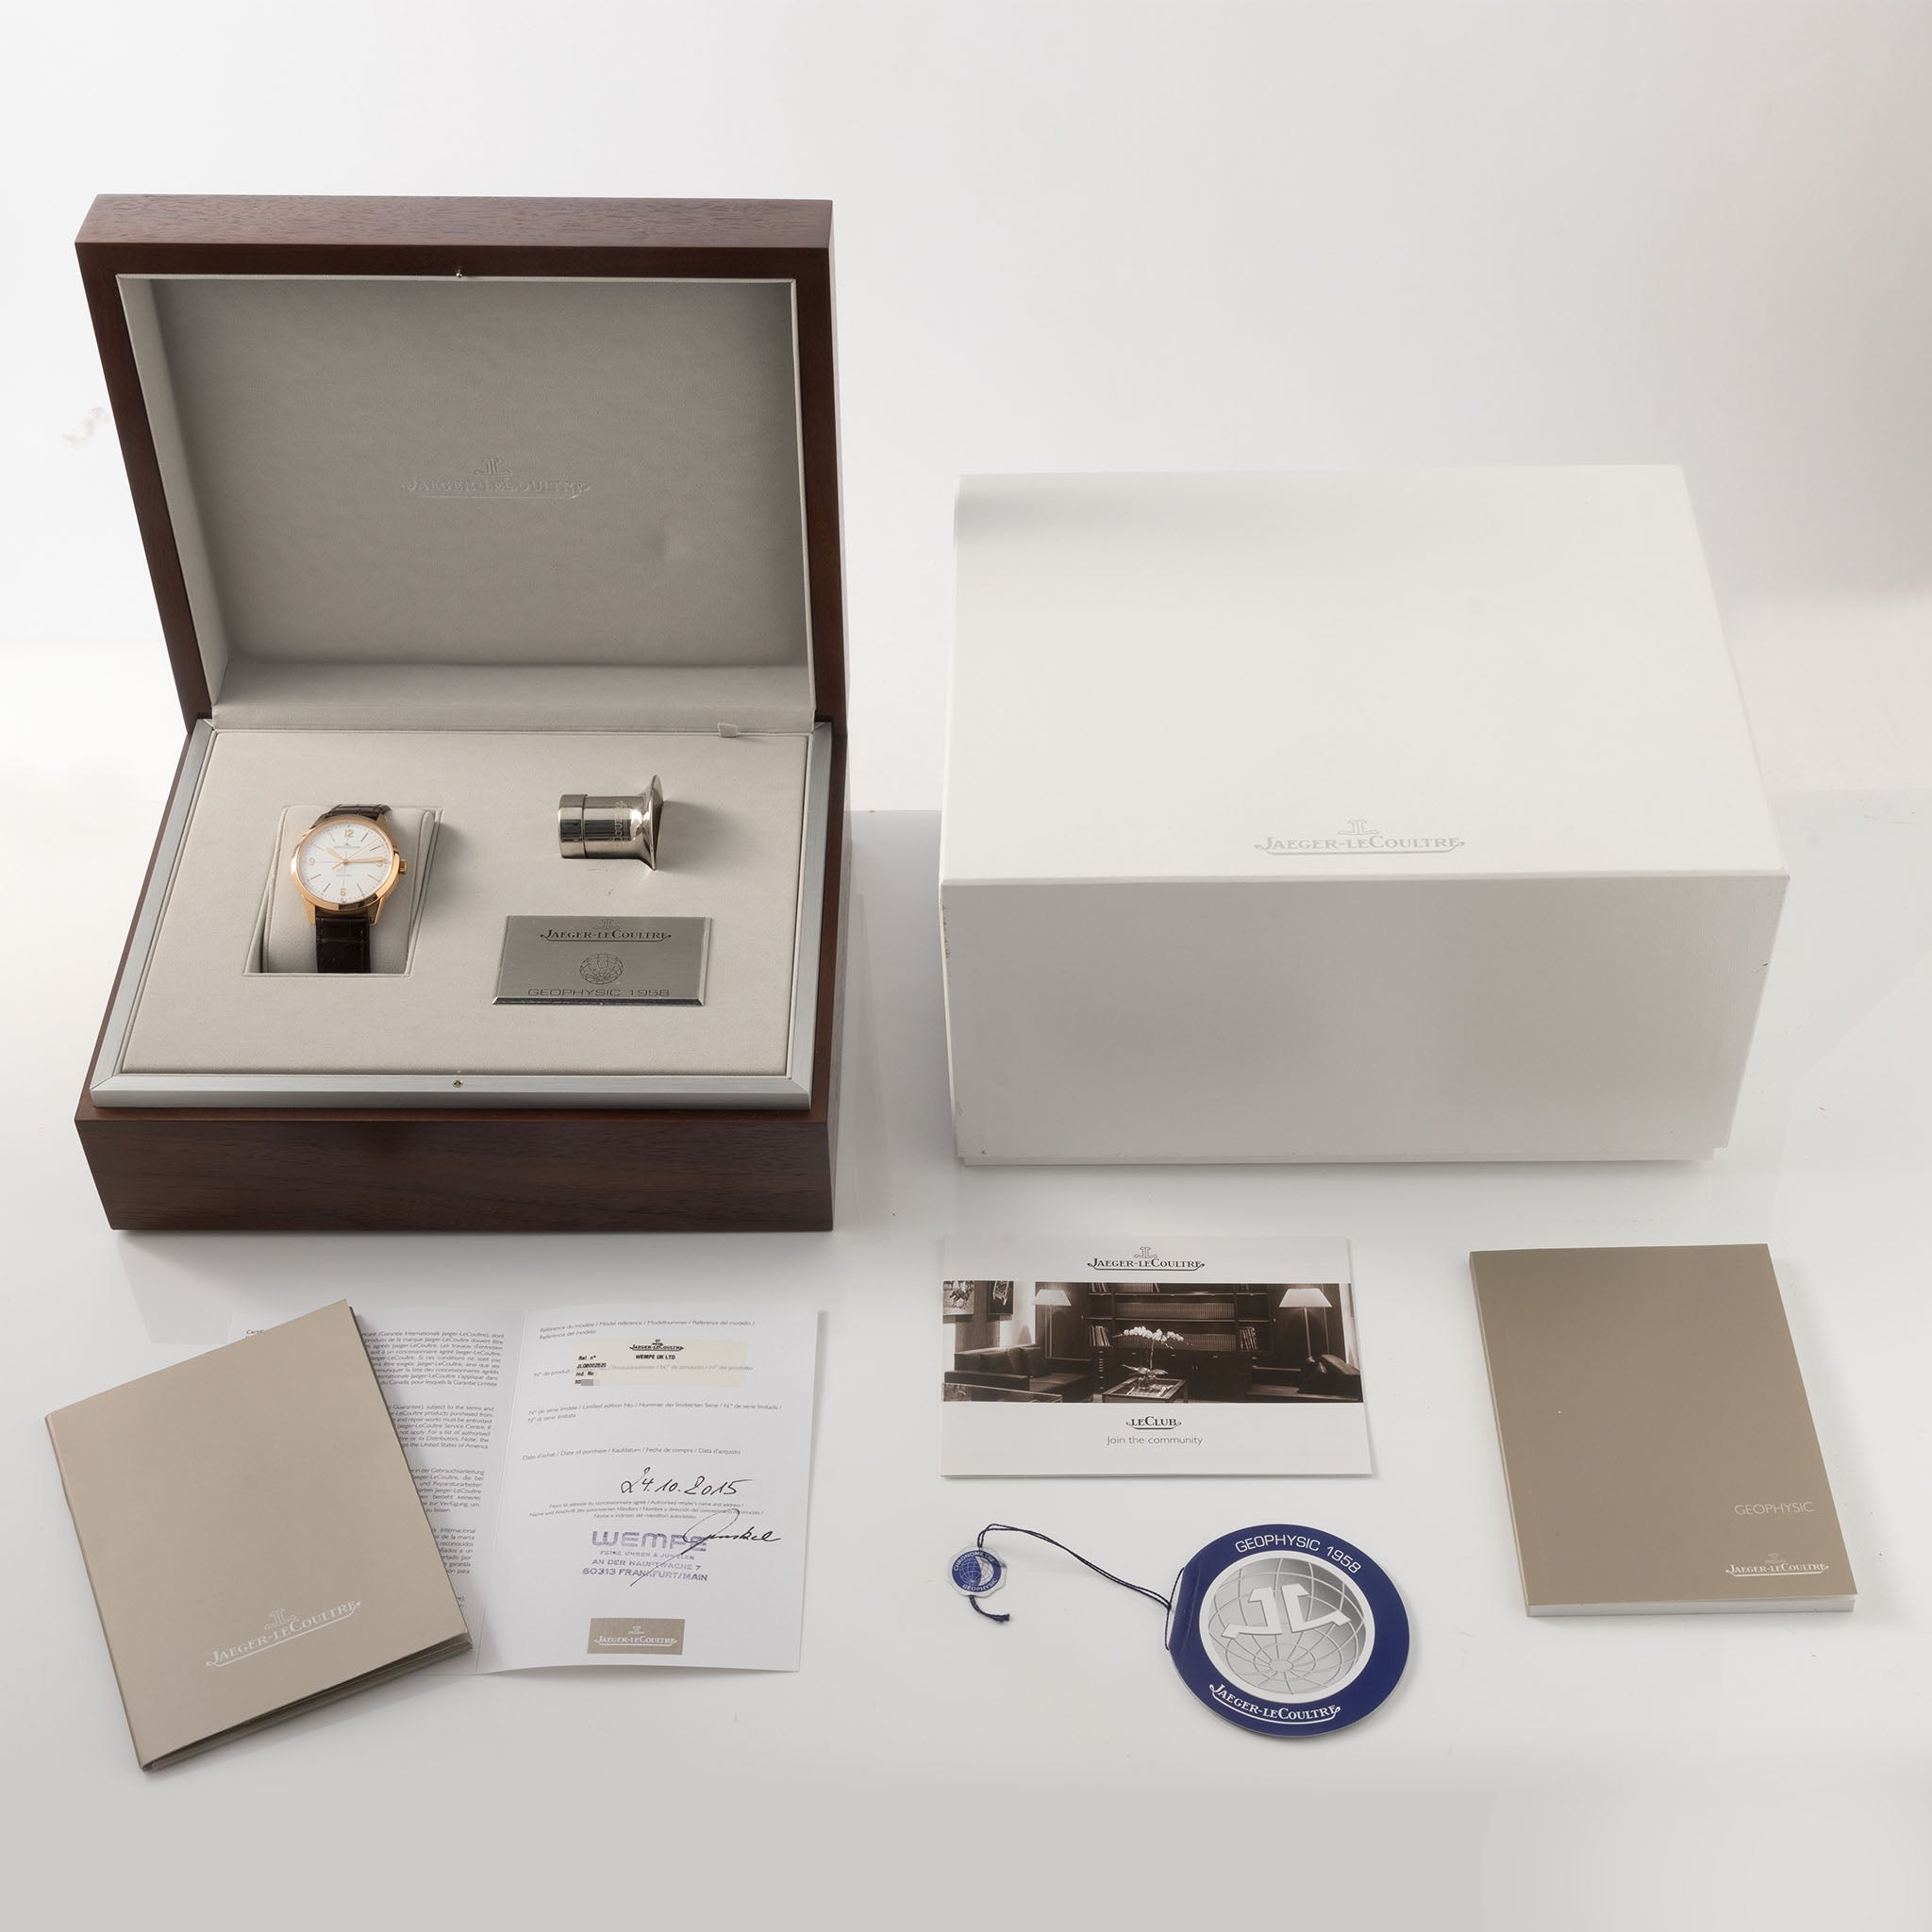 Jaeger-LeCoultre Geophysic 1958 Rose Gold with Box and Papers Ref JL Q8002520 